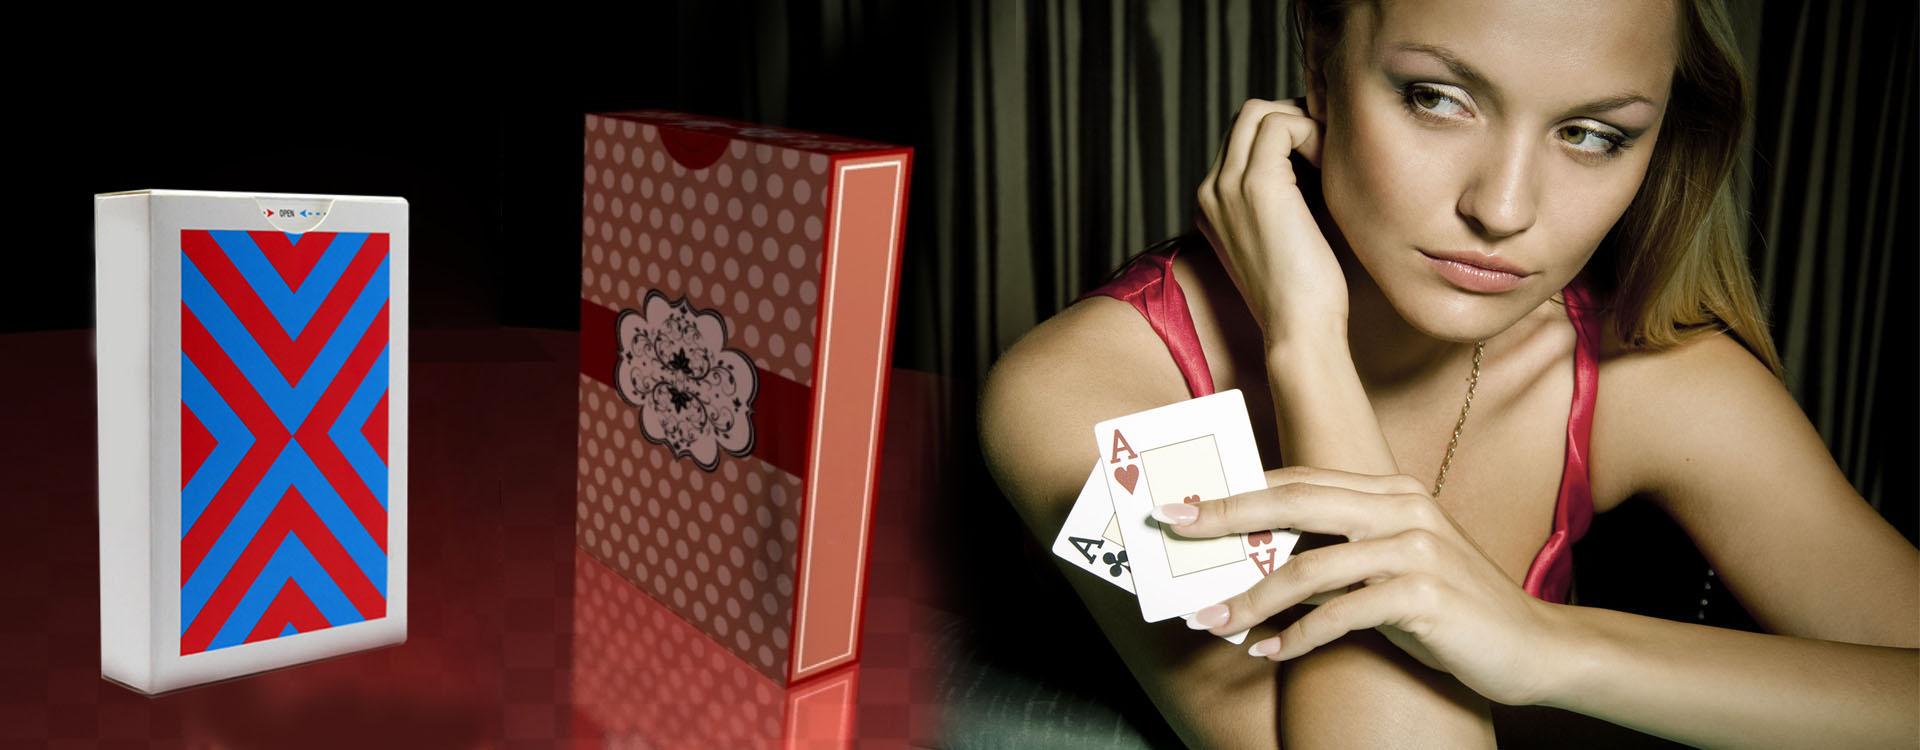 Spy Cheating Playing Cards Shop in Shadi Pur, Patel Nagar in Delhi India Buy Online KK Cards Delhi at Low Price Gambling Cards Devices & Gadgets, Poker Game, Secret Soft Contact Lenses for Invisible Marked Cards from Cheating Playing Cards Shop in Shadi Pur, Patel nagar in Delhi India